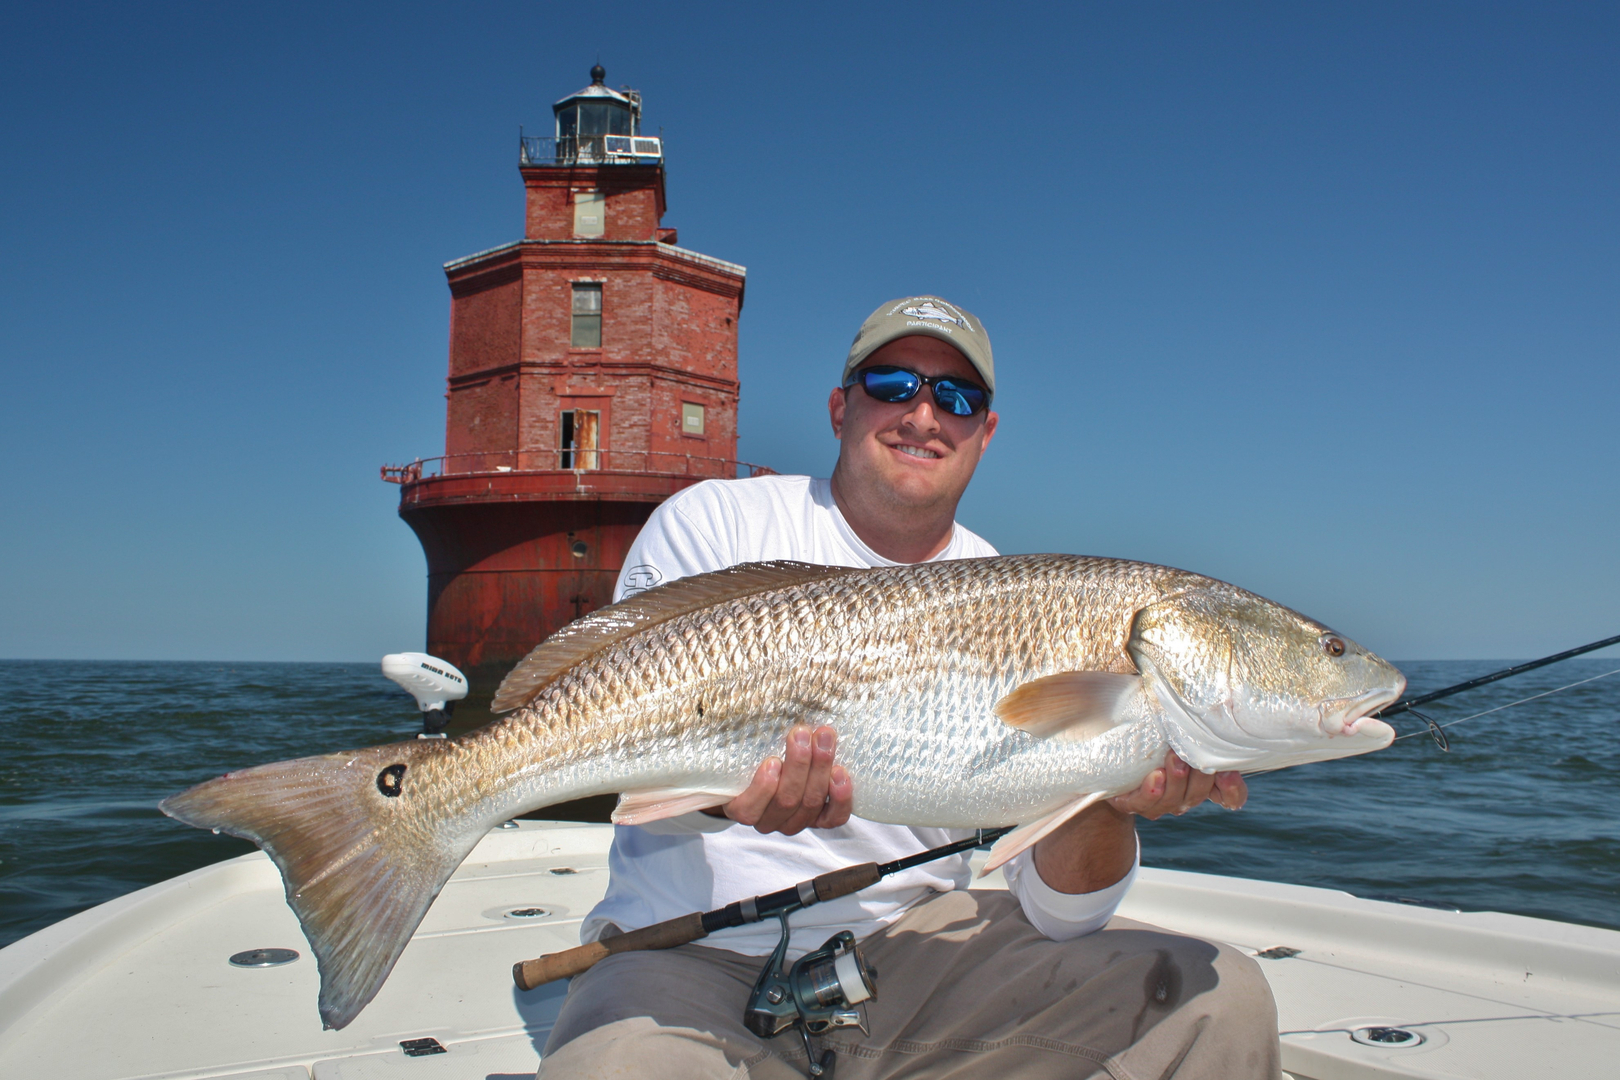 Chesapeake Bay Fly Fishing Guide & Light Tackle Fishing Charters